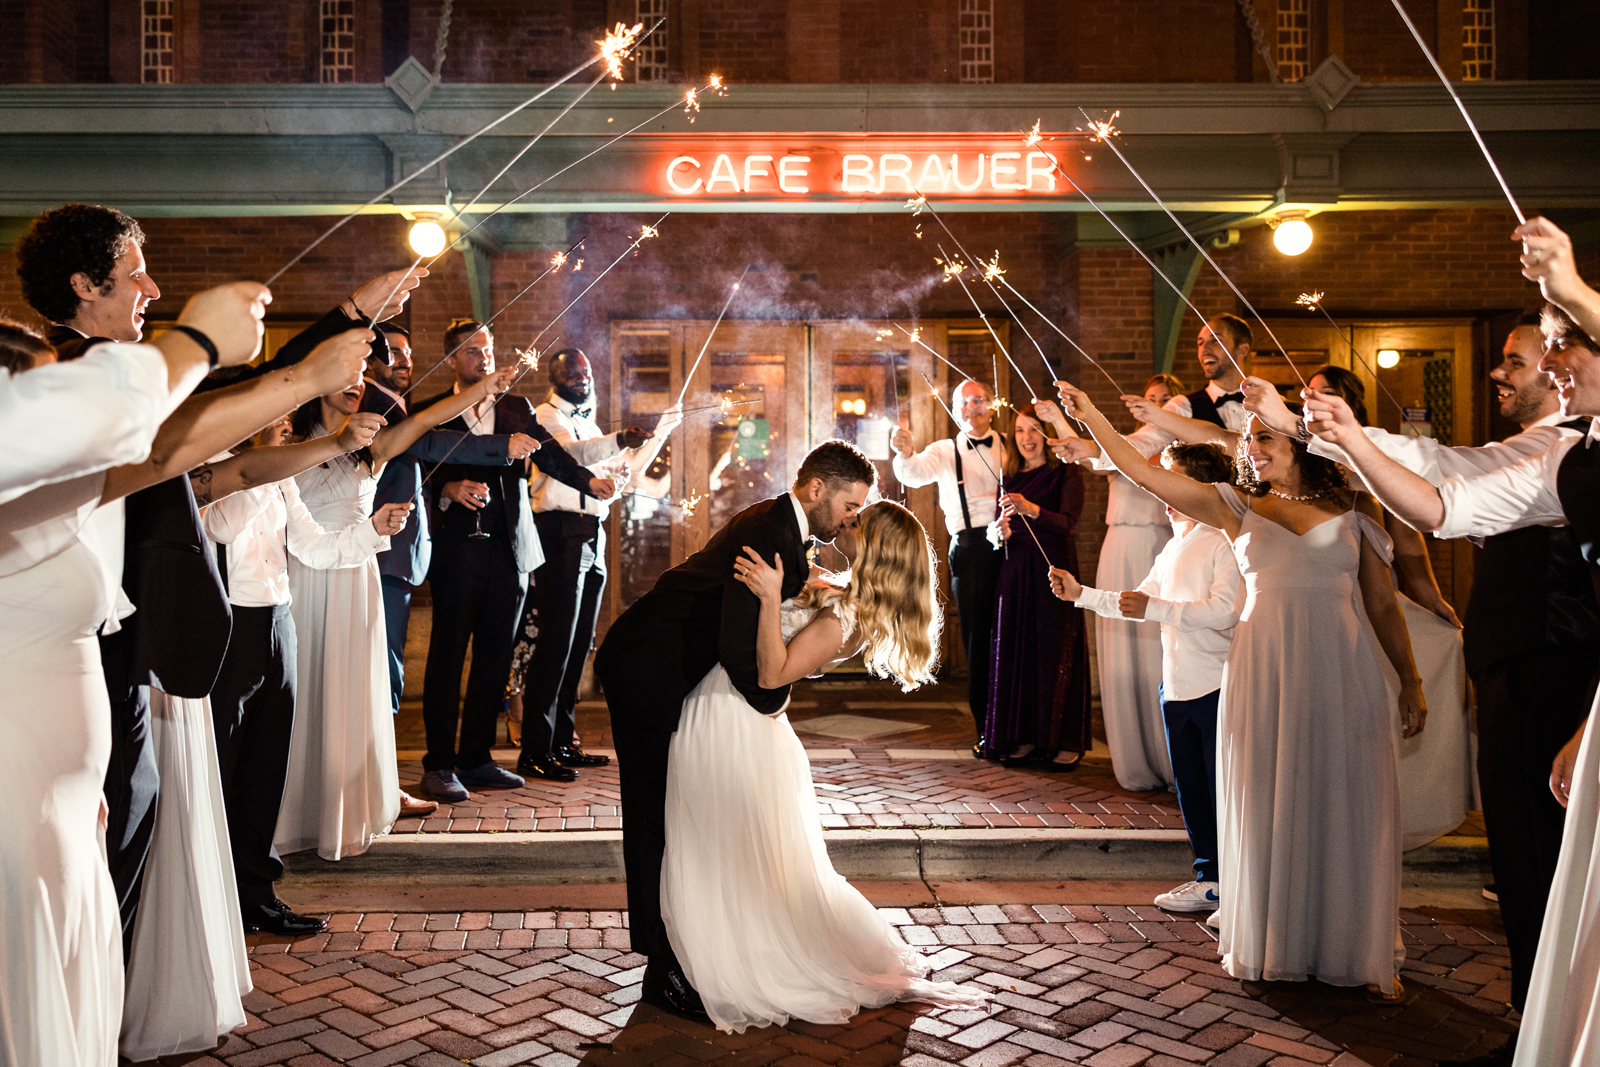 Bride and groom kiss in front of Cafe Brauer at night during romantic sparkler exit by Chicago wedding photographer Emma Mullins Photography